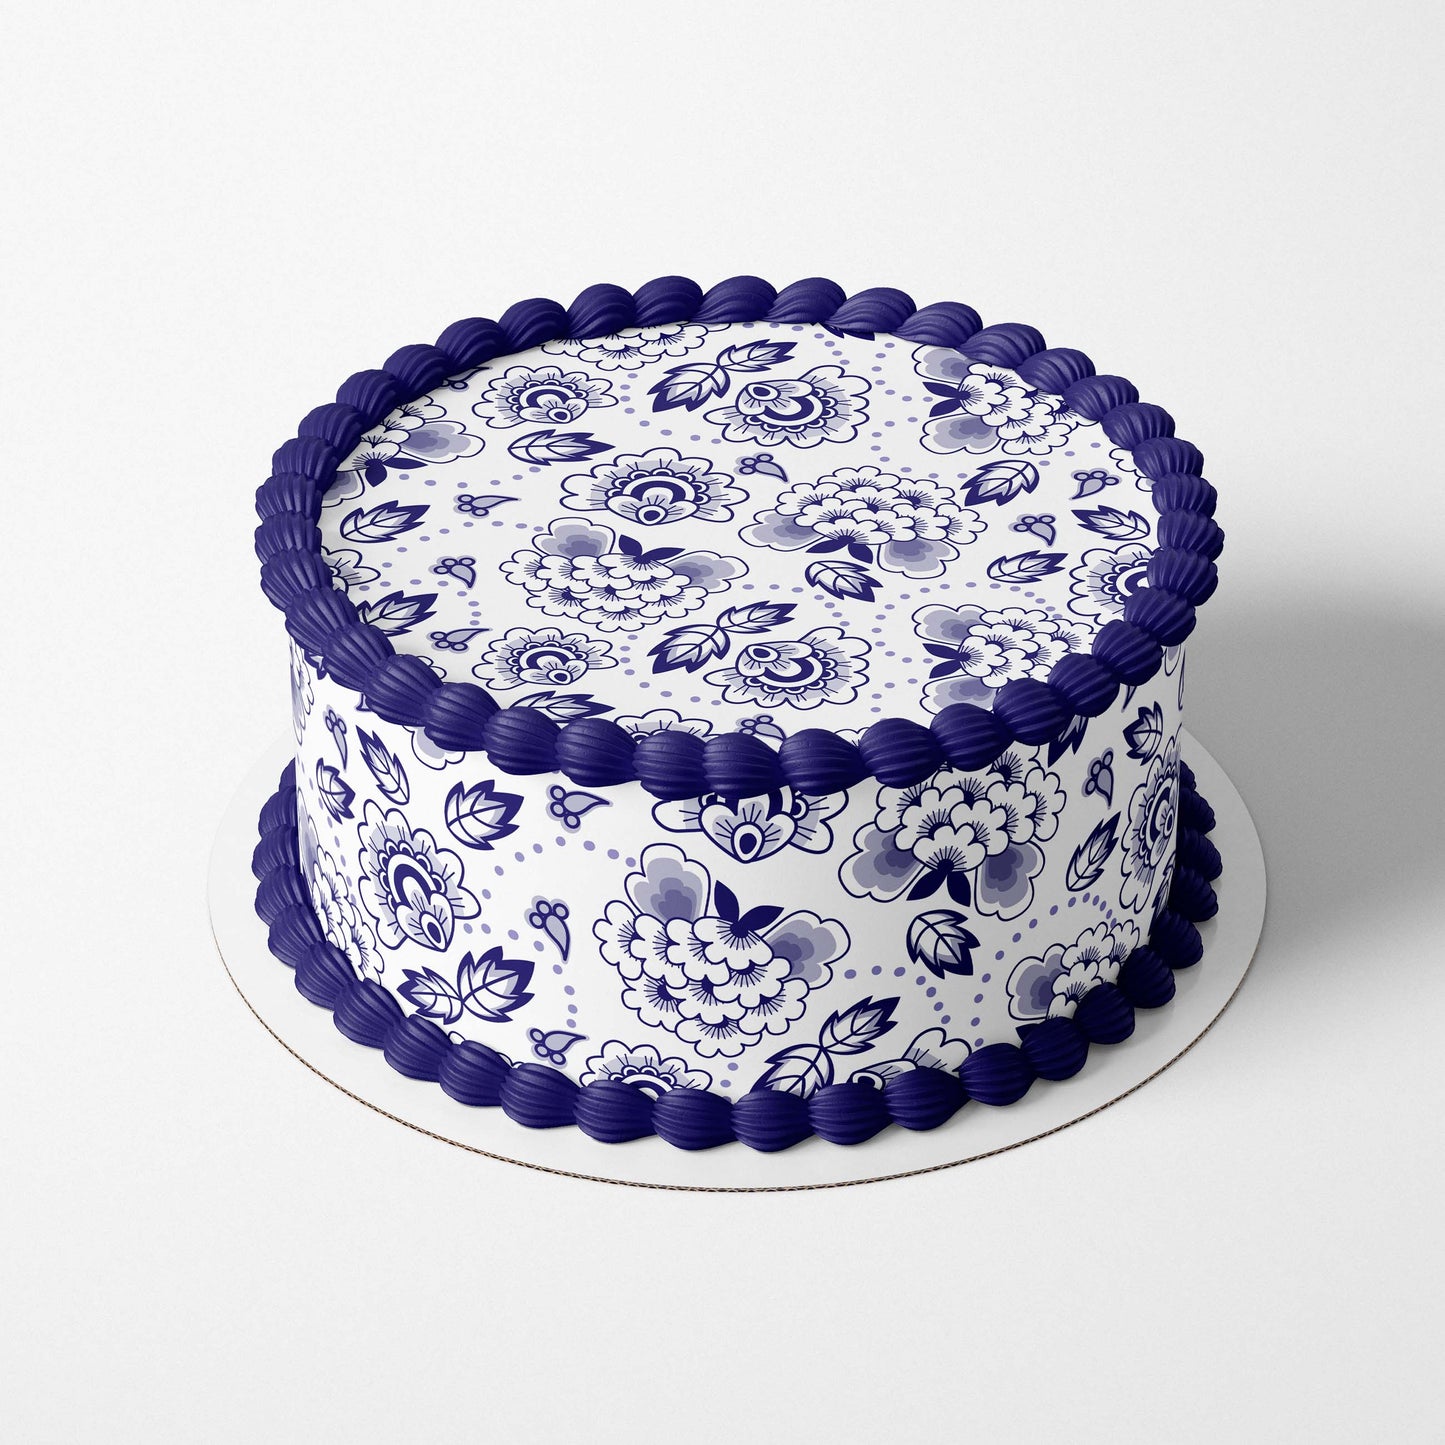 Add this beautiful Chinoiserie Chinese Indigo Floral edible icing sheet on cakes or any sweet treats. Perfect for a wedding, birthday or any special occasion cake. 